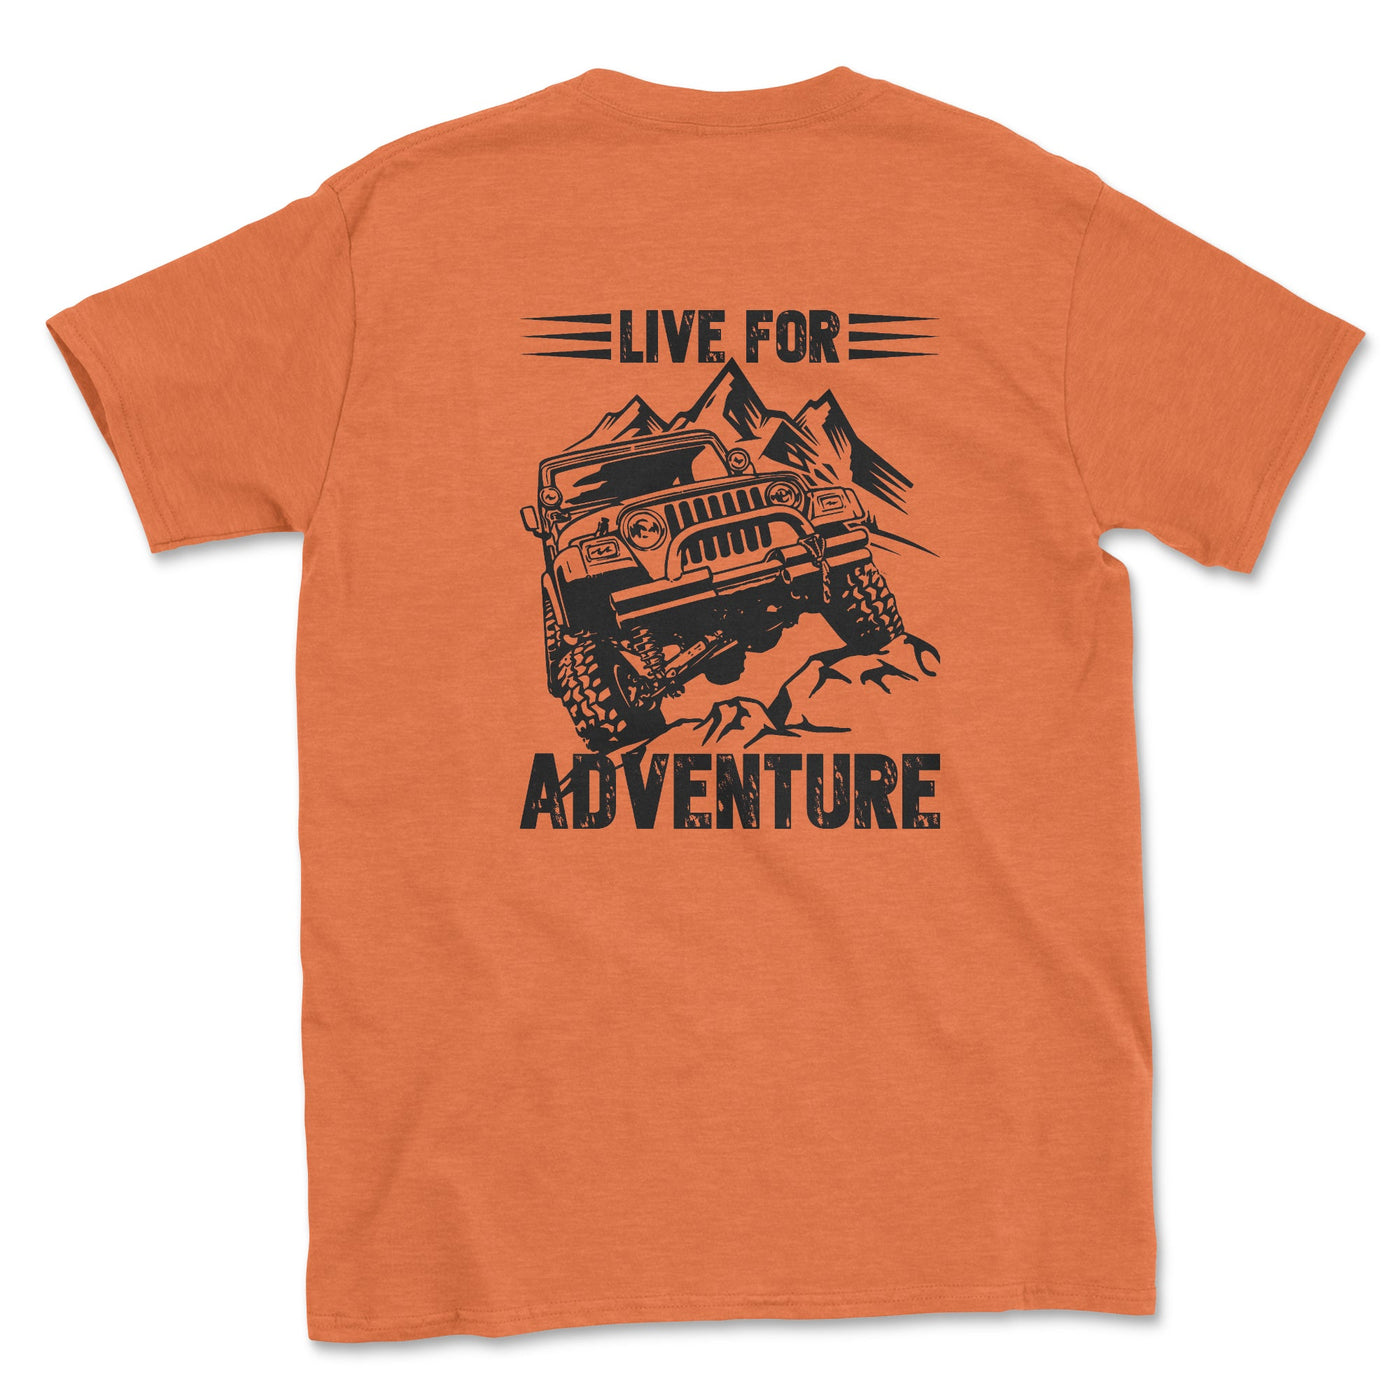 Live for Adventure T-shirt - Goats Trail Off-Road Apparel Company